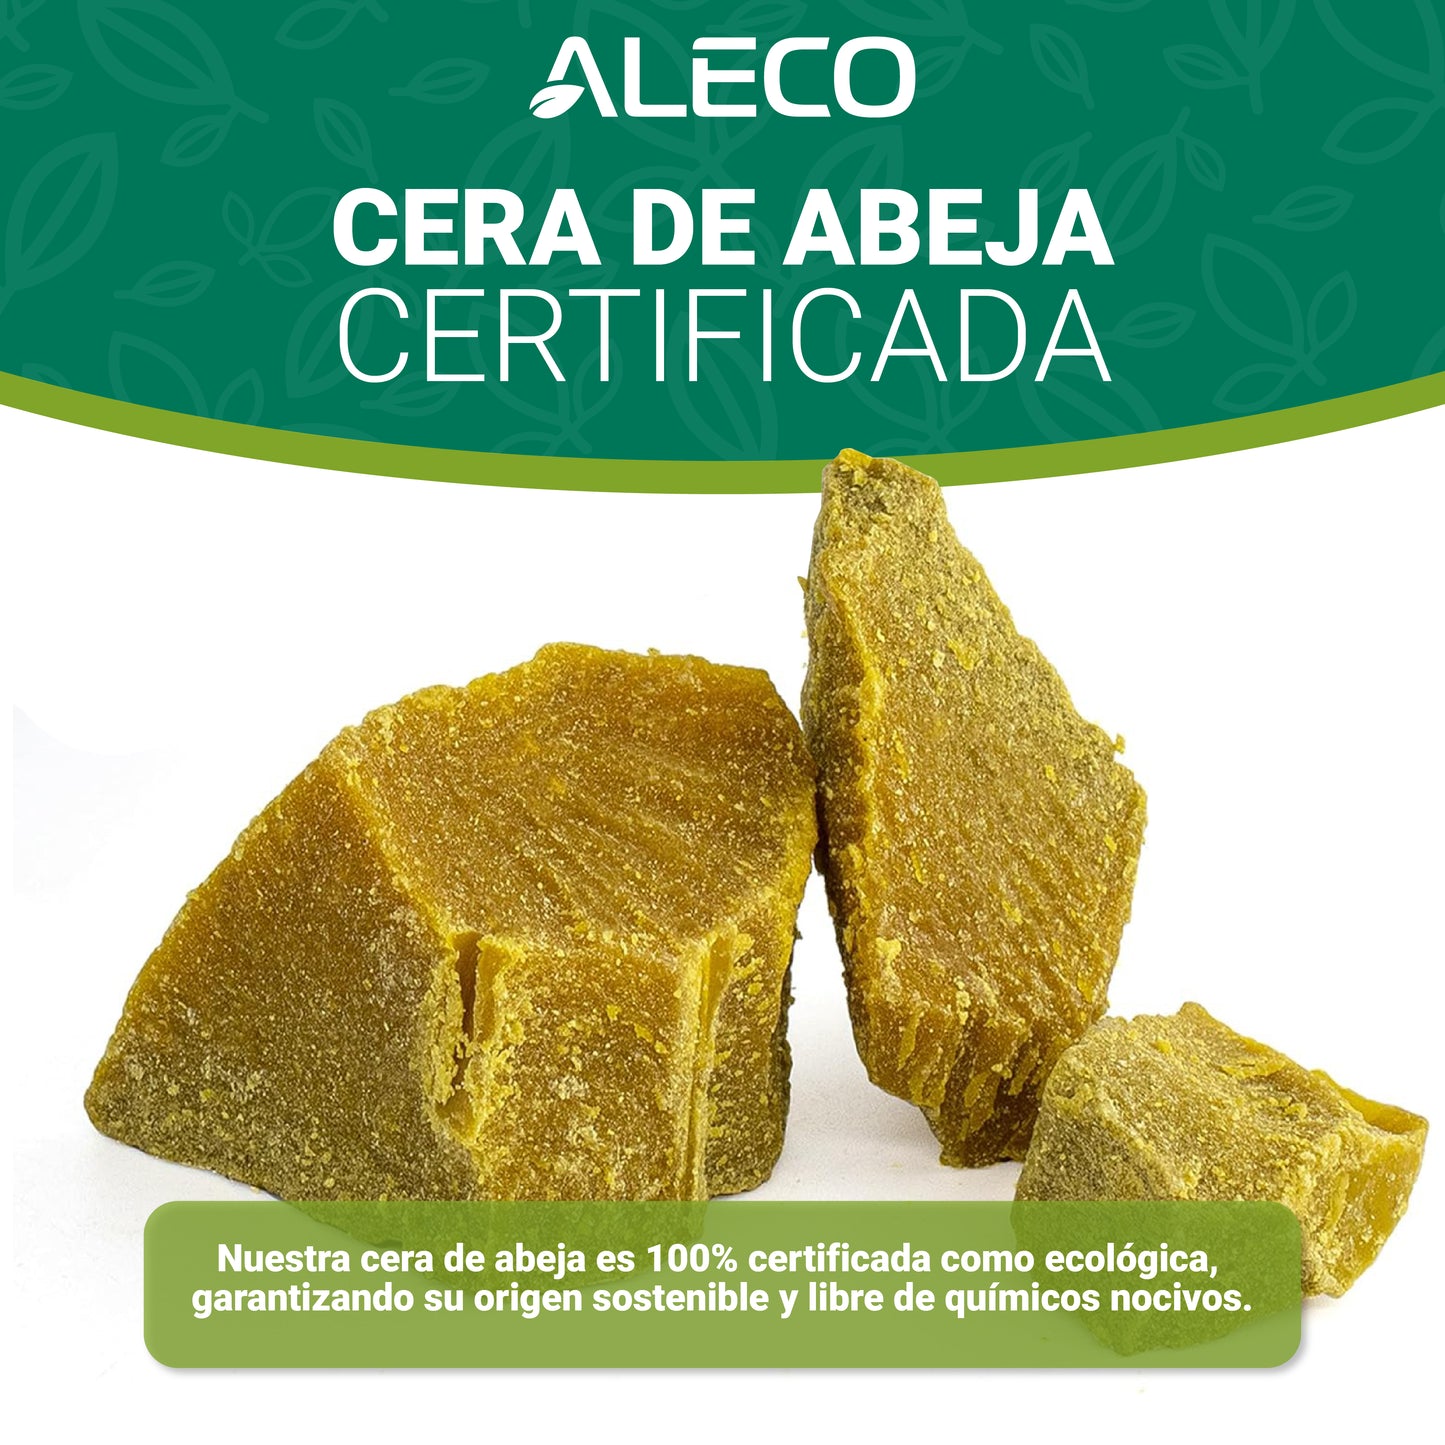 Pure National Beeswax: ECO, Certified, Ideal for Natural Cosmetics and Candles 